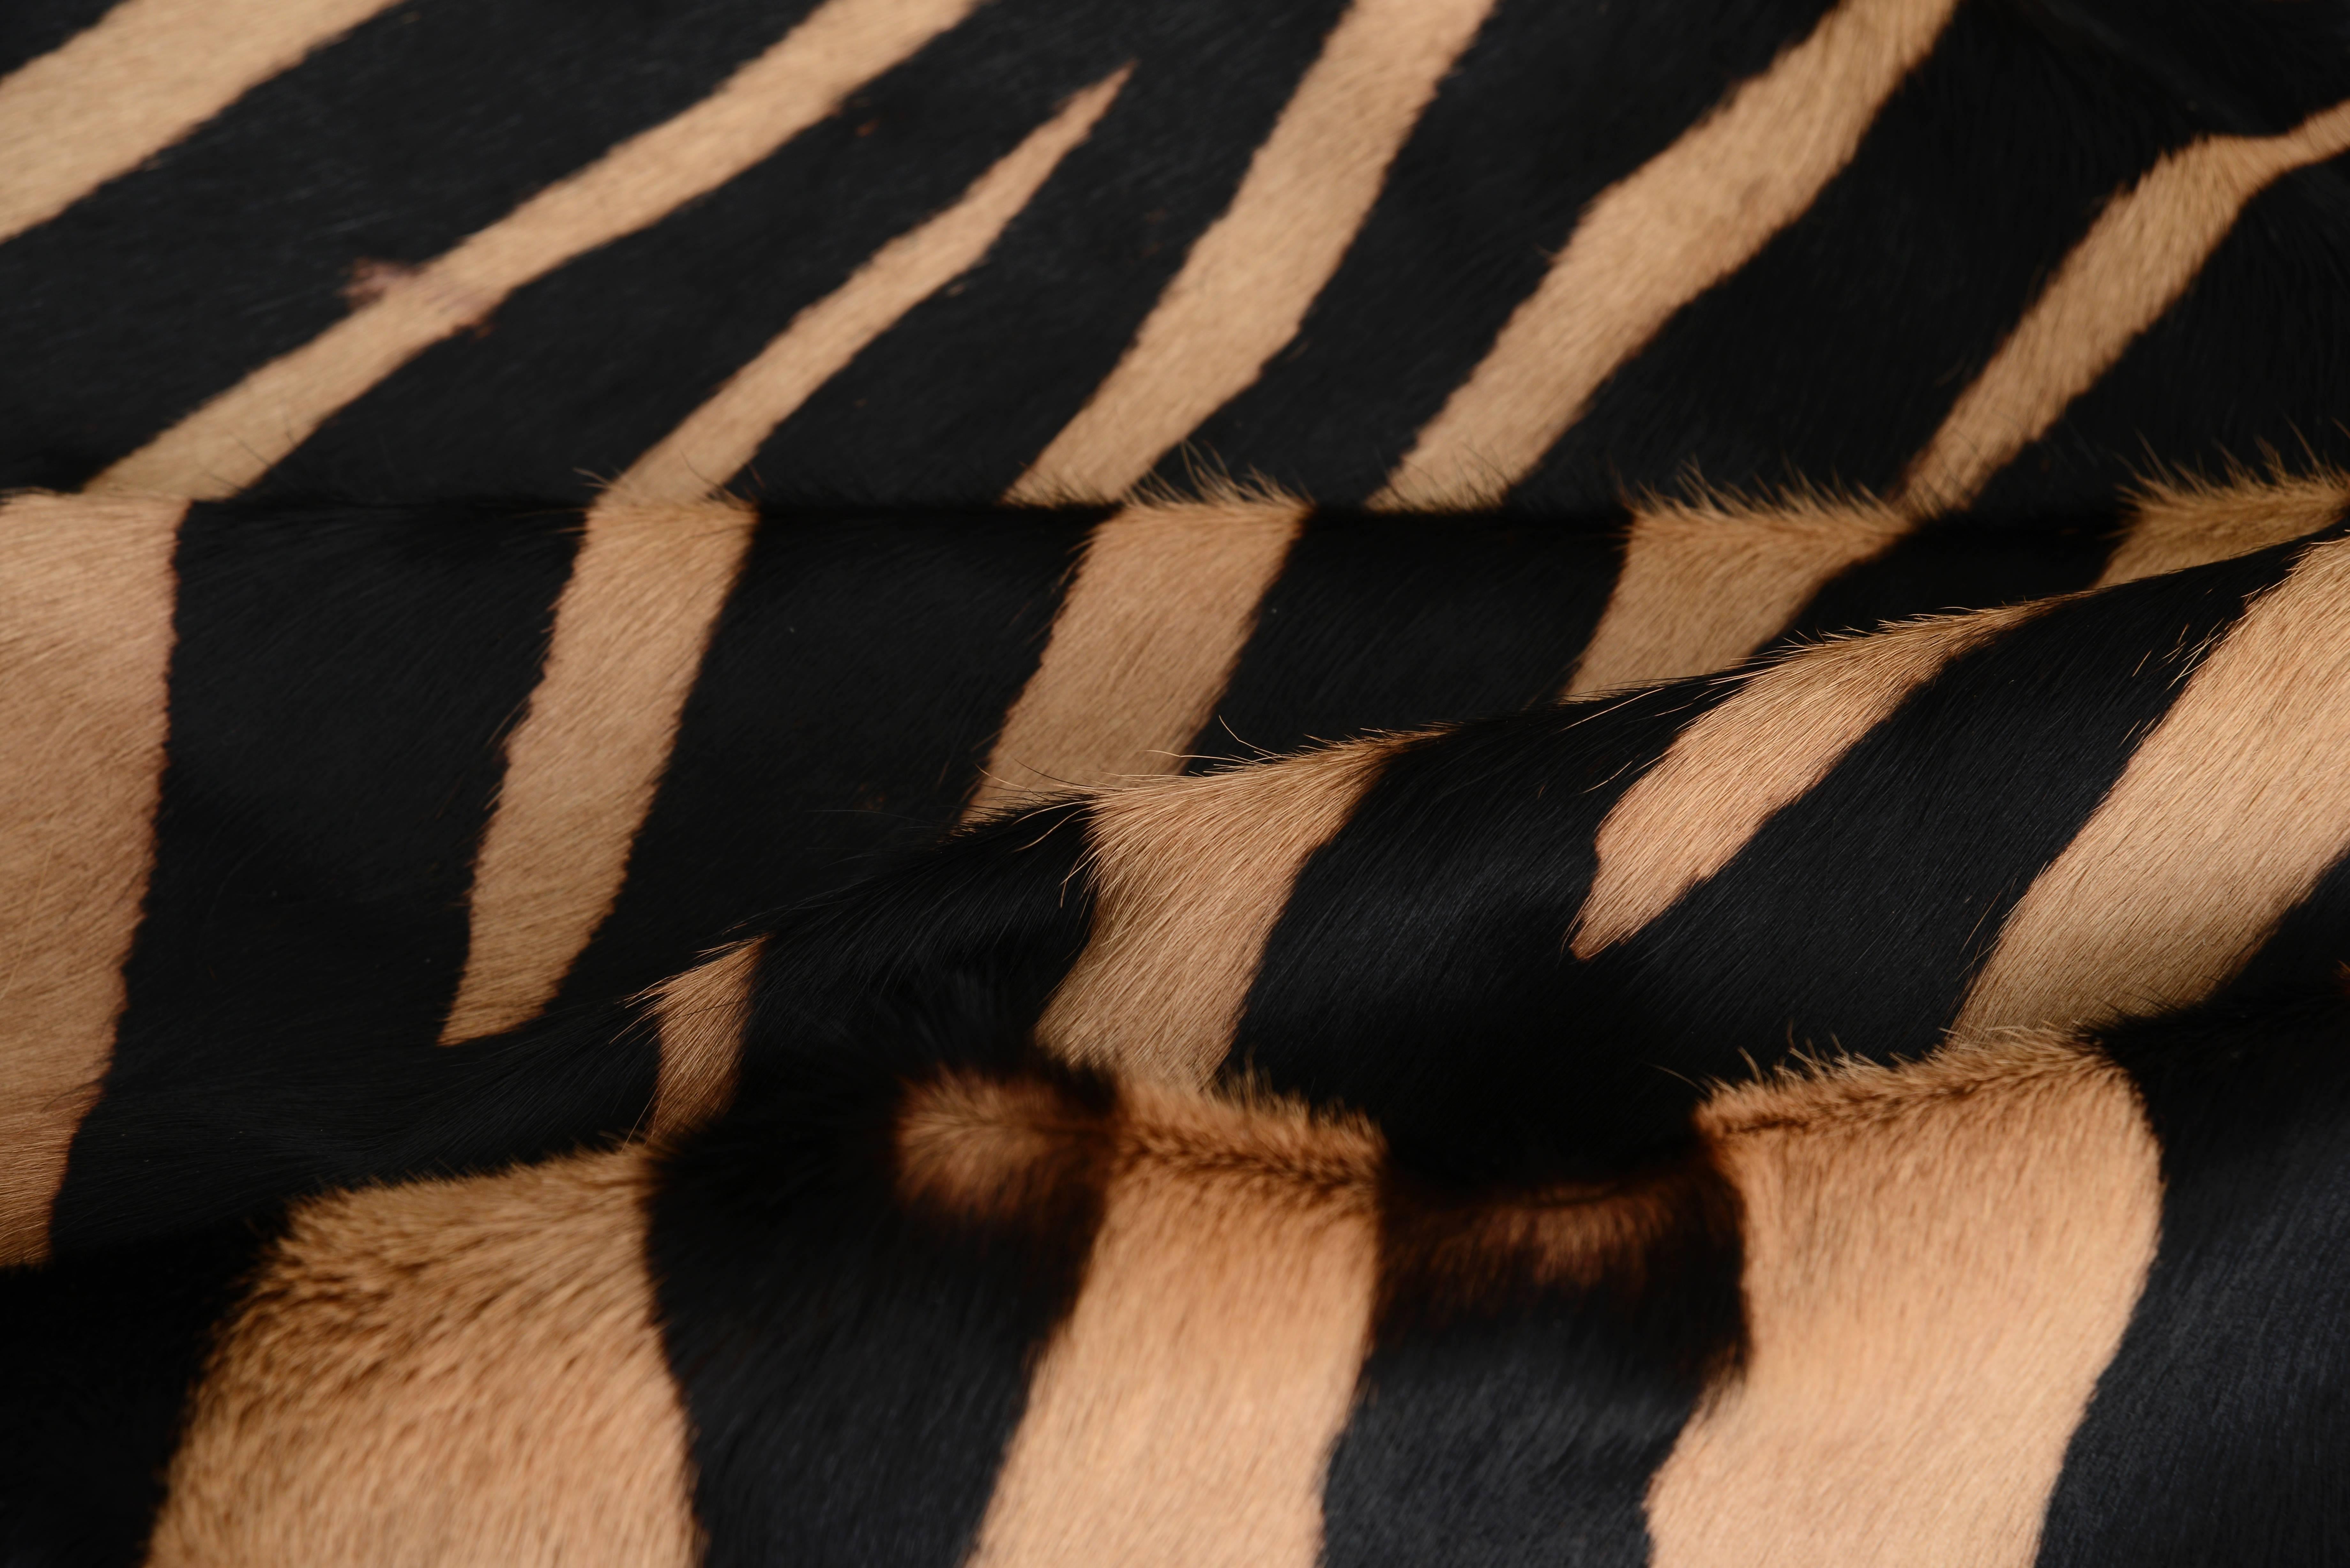 Zebra Stencil Printed (Ink on Caramel) Cow Hide:

All of our Hair Cow Hides are full hides and measure approximately 7'w x 8'l. They are of the highest quality from the French region of Normandy and naturally raised in a free roaming field.   The